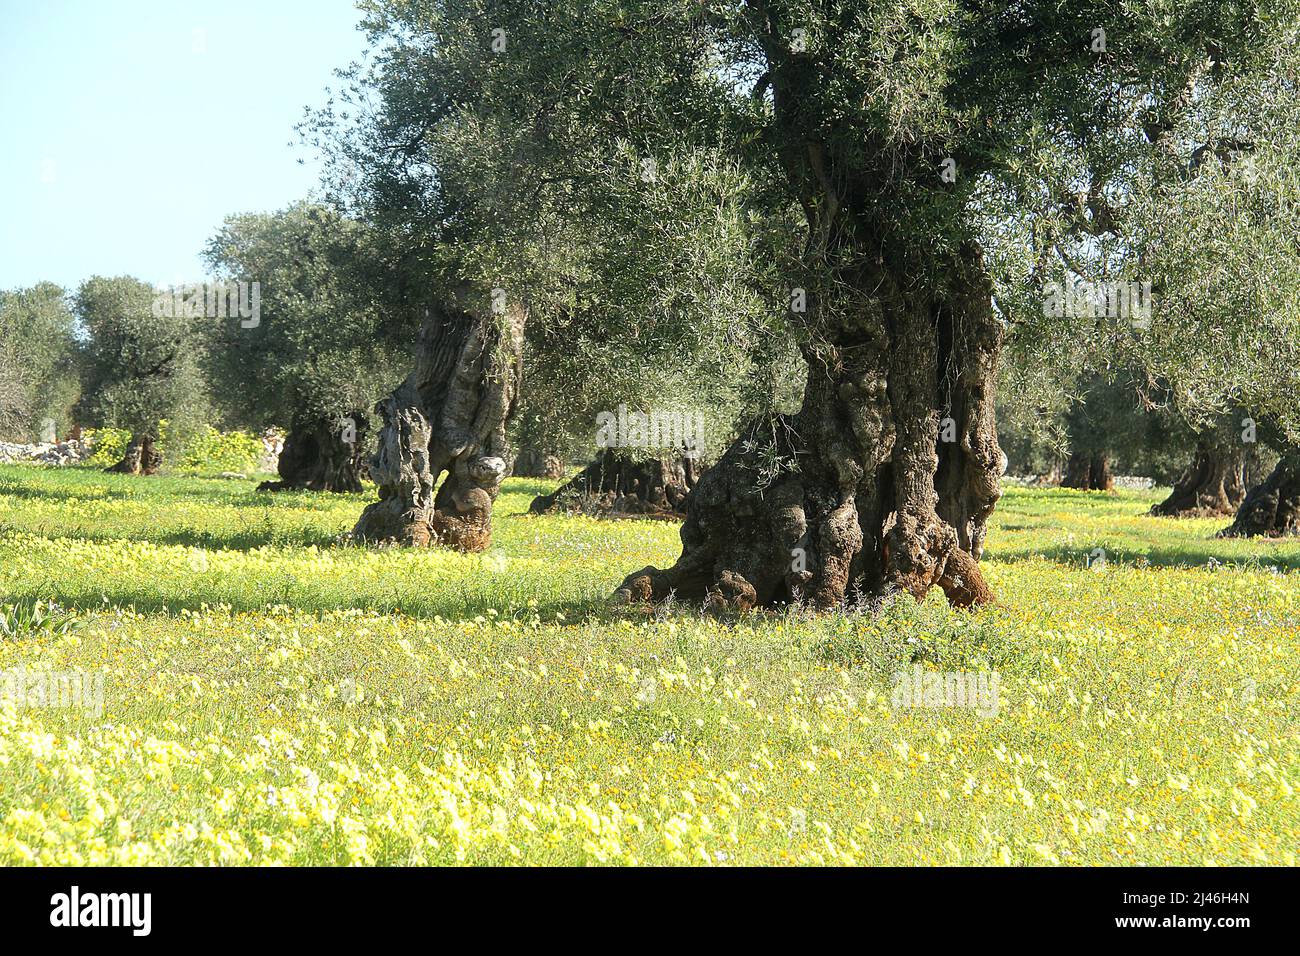 Orchard of old olive trees with odd trunks in Puglia, Italy Stock Photo